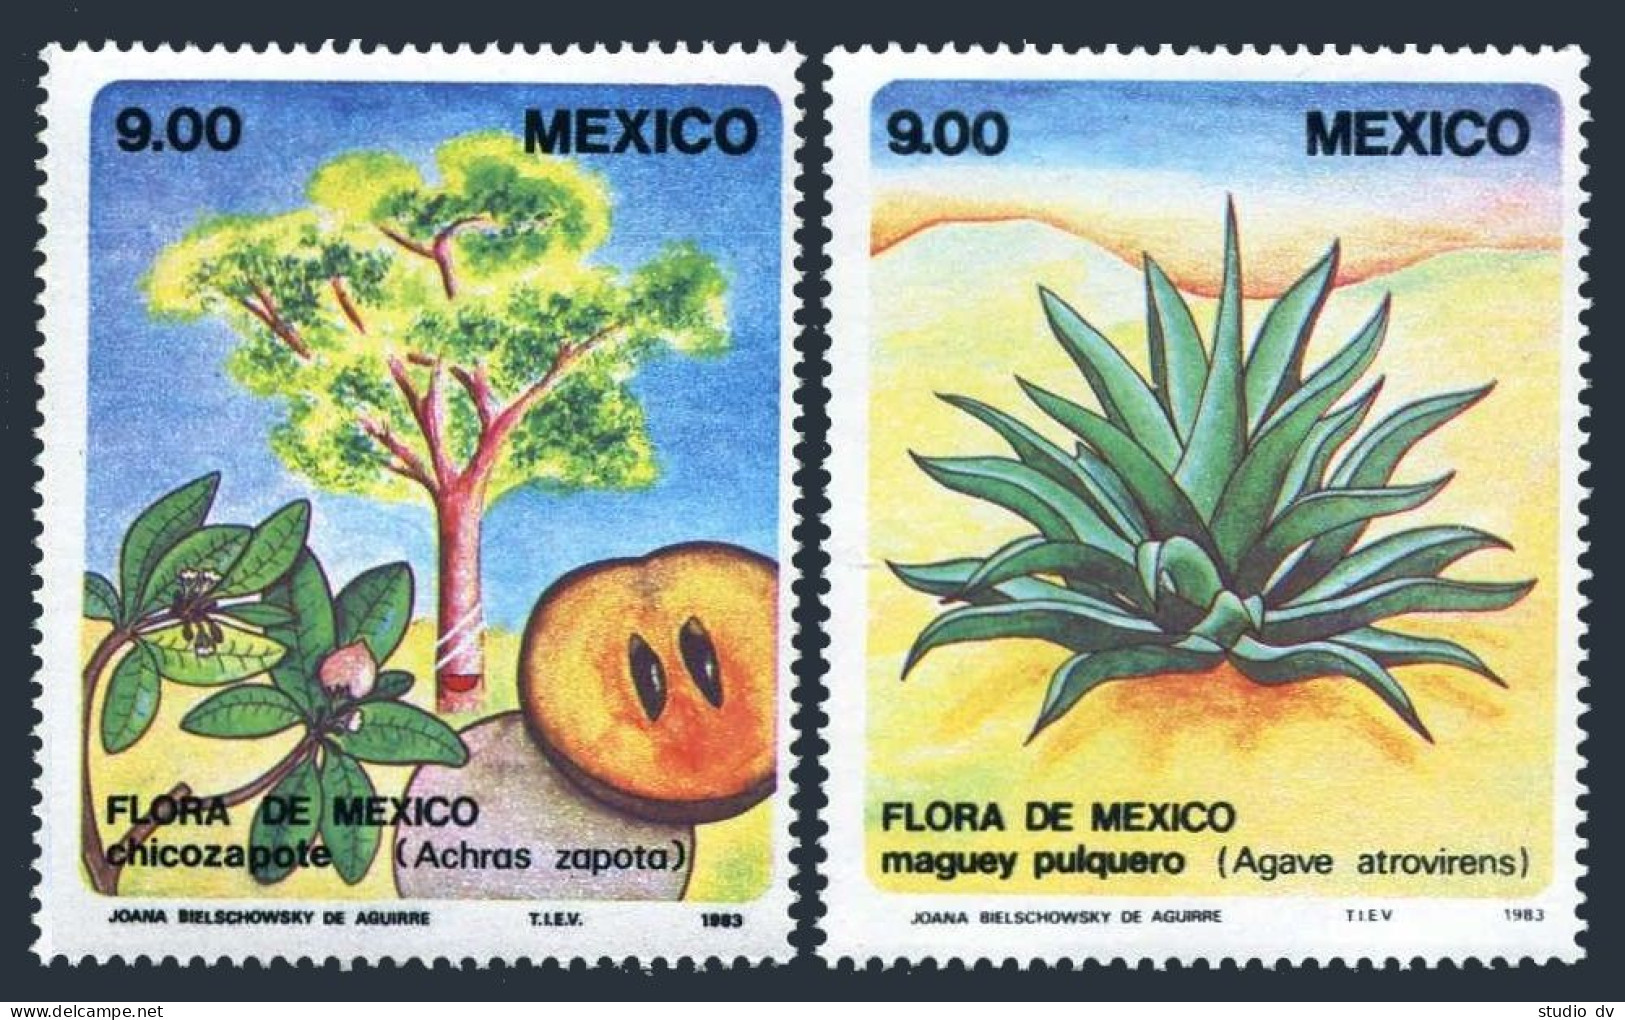 Mexico 1324-1327 Sheets,MNH.Mi 1871-1874. Plants,Agave,Butterflies,Snake,1983. - Mexico